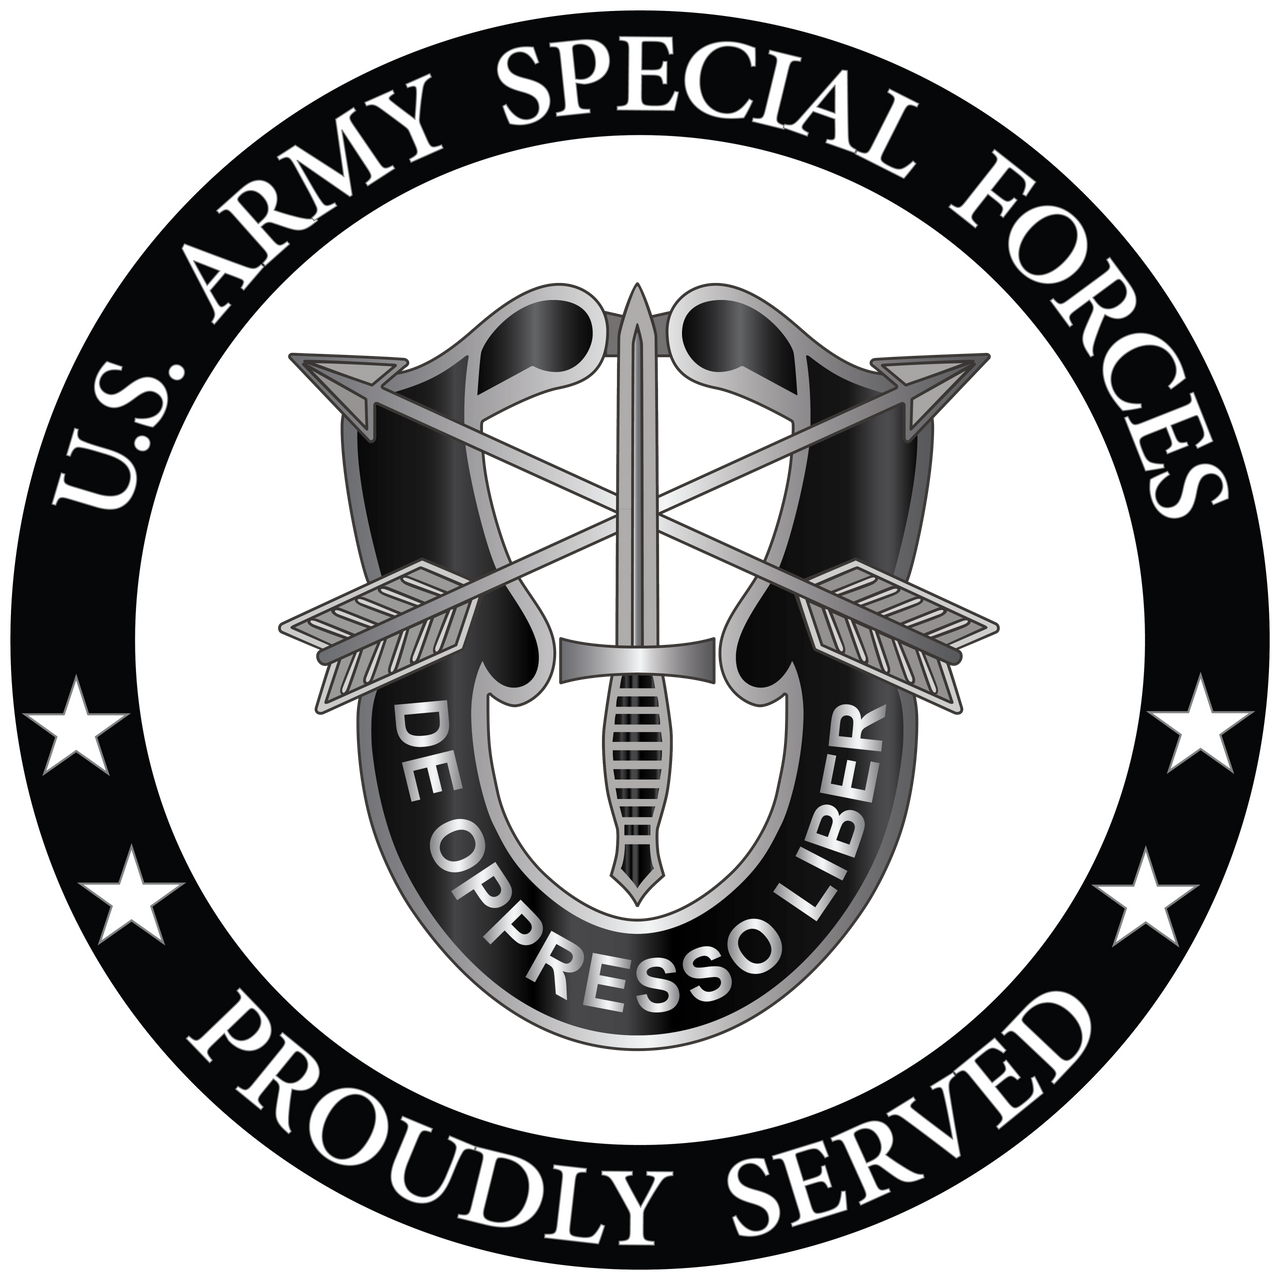 United States Army Decal